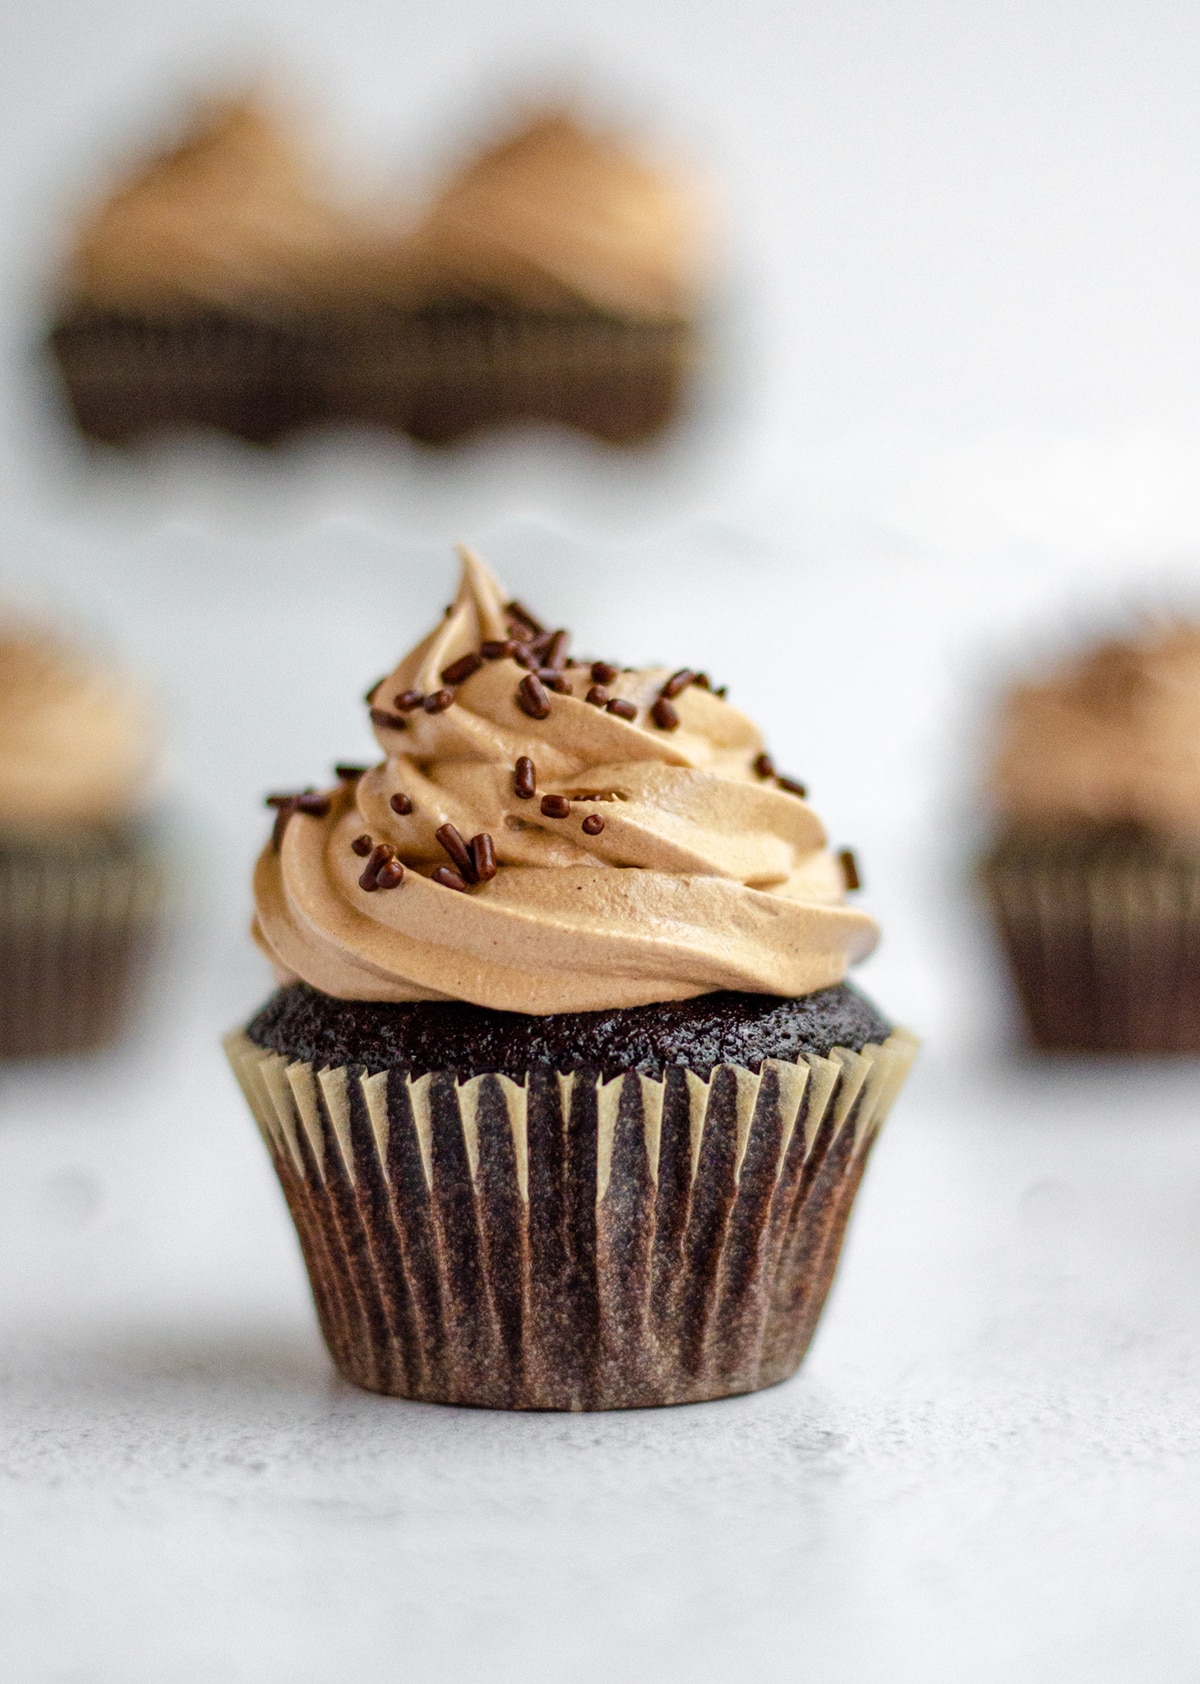 simple chocolate cupcakes with chocolate swiss meringue buttercream and chocolate sprinkles on top